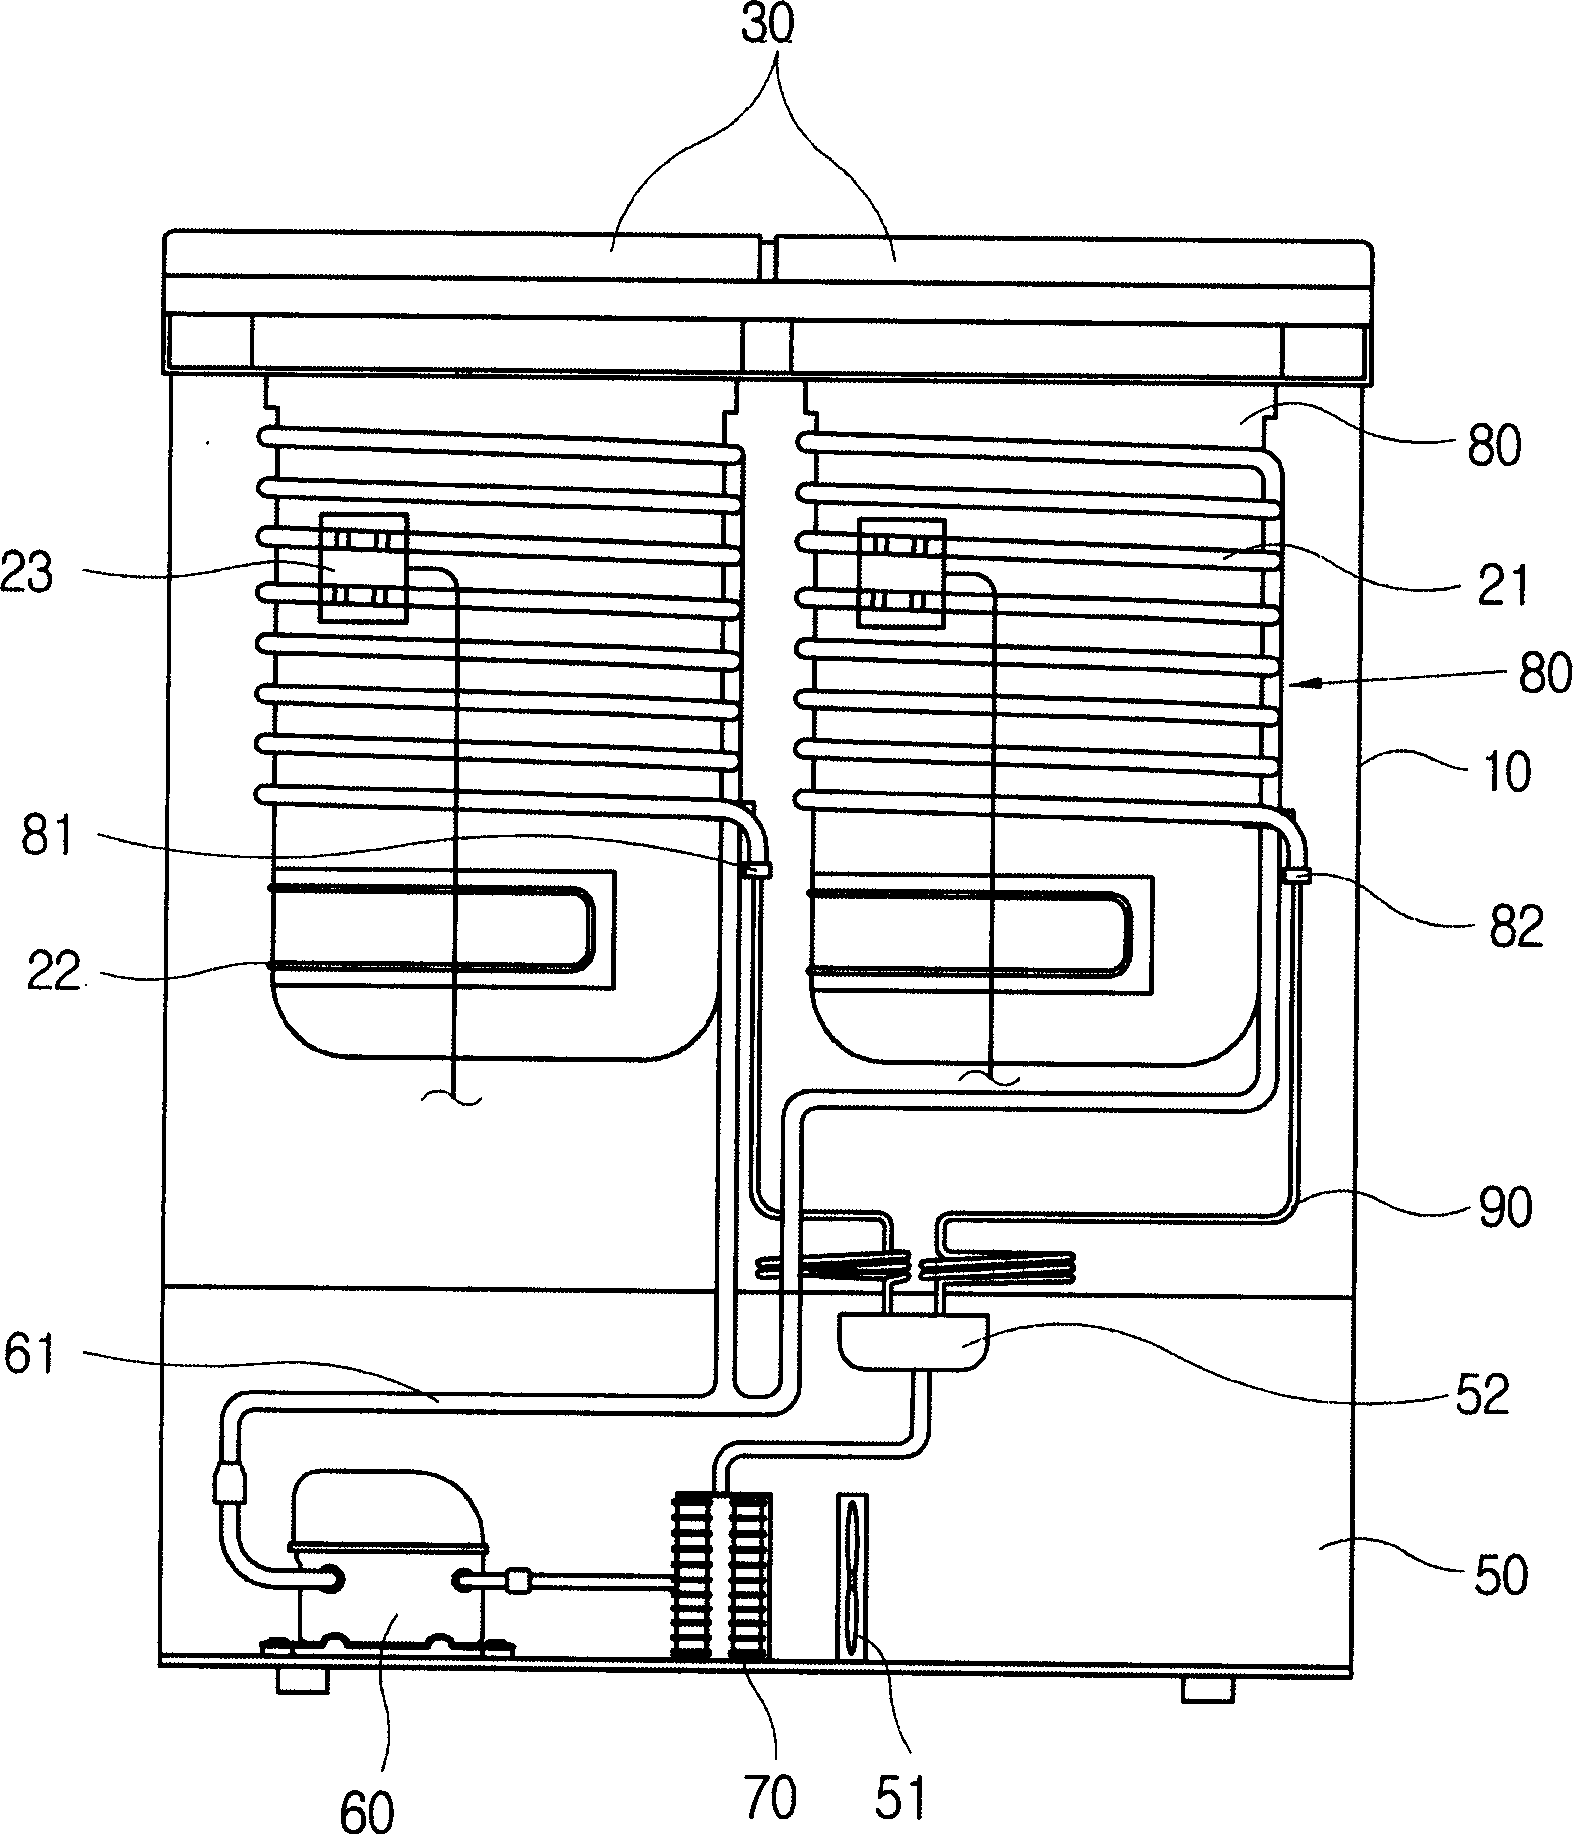 Evaporator layout structure of refrigerator